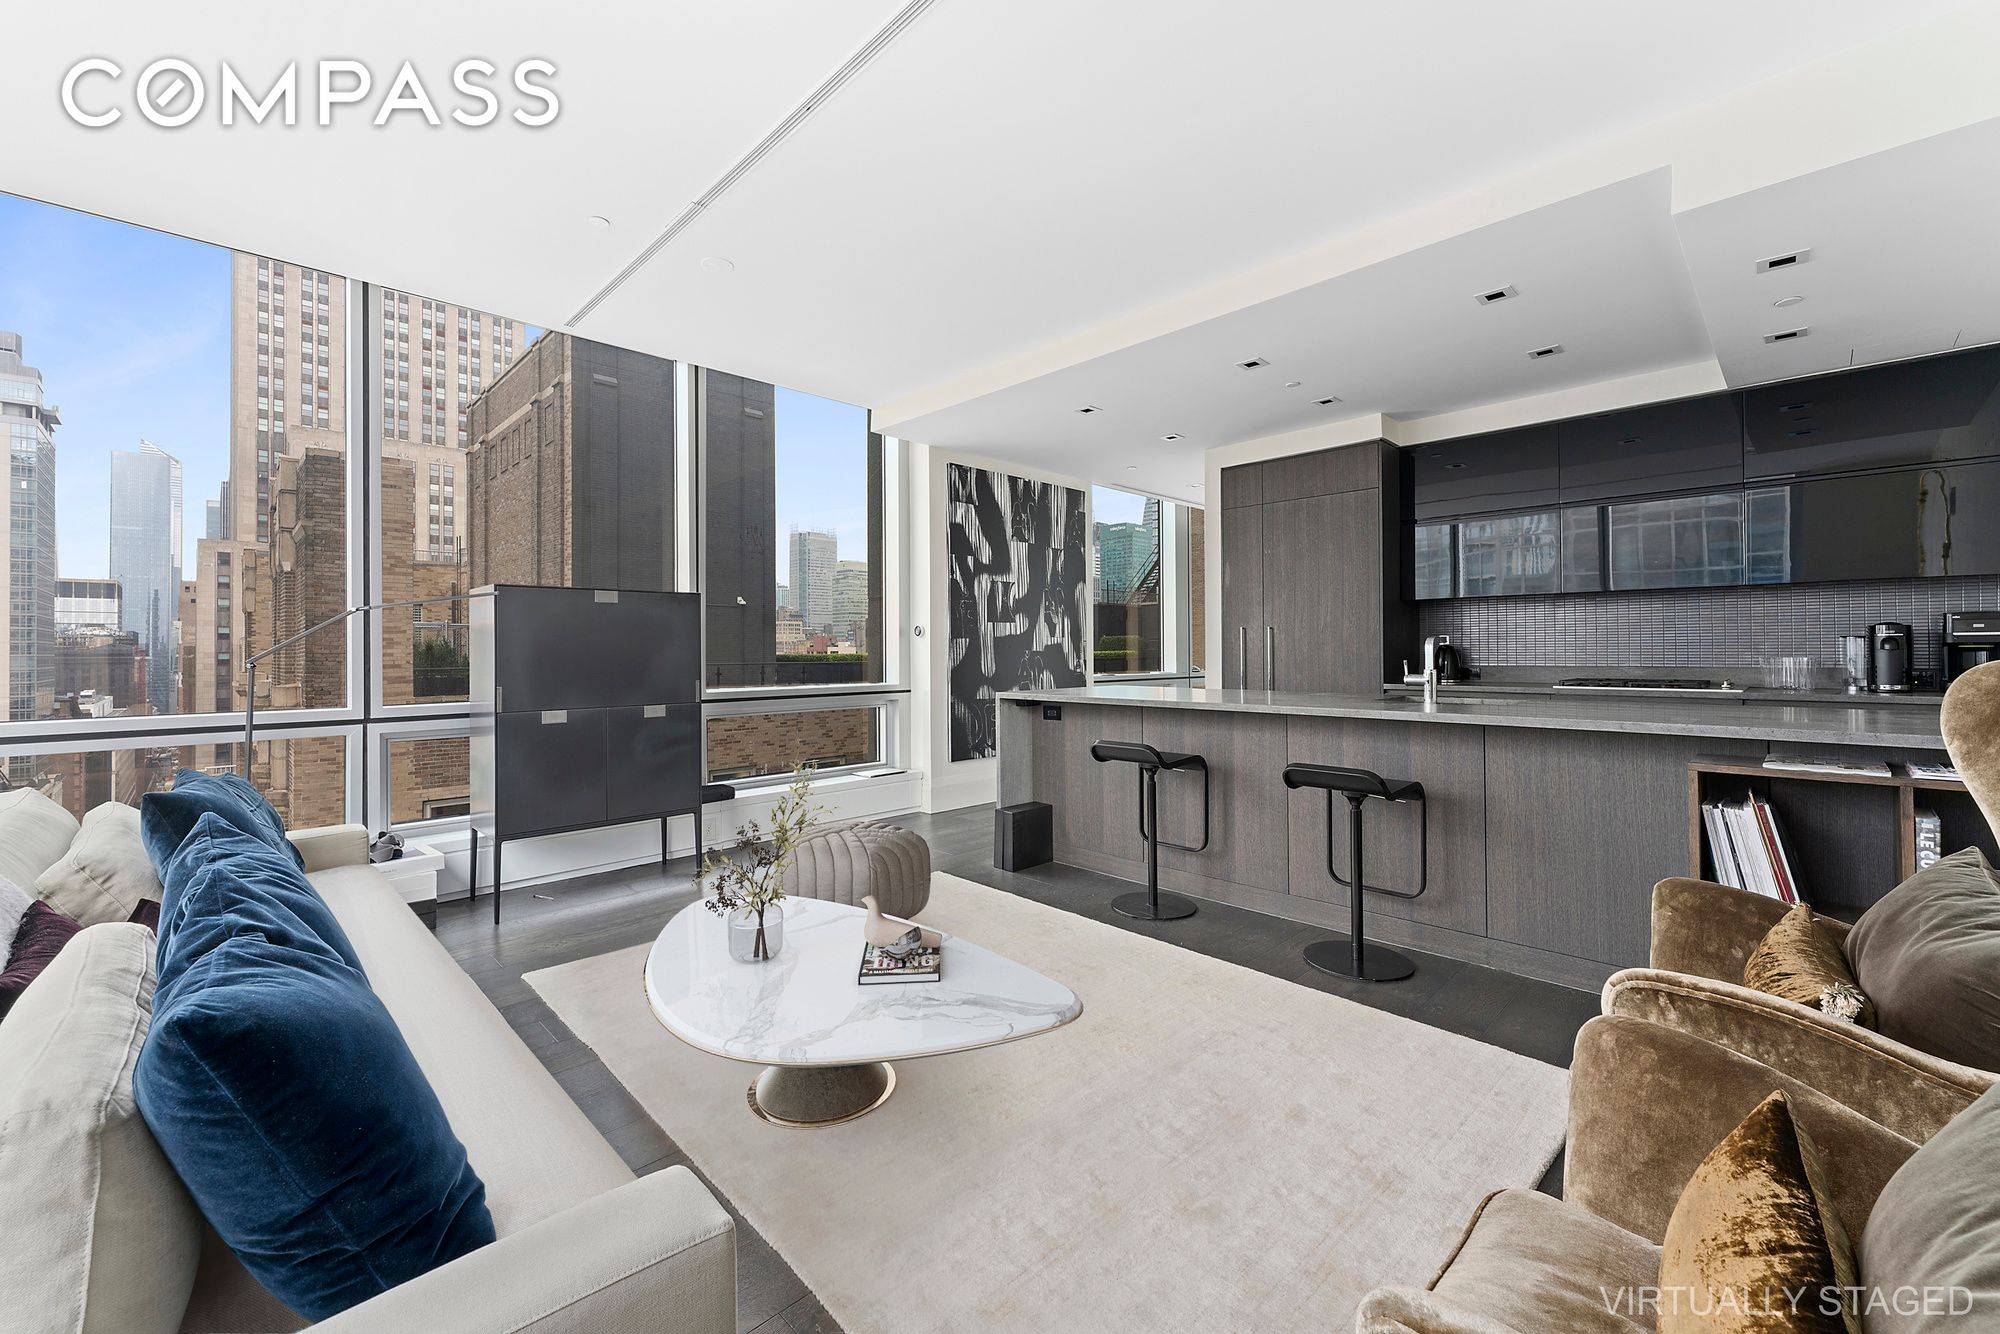 172 Madison offers luxurious and grand scale living.